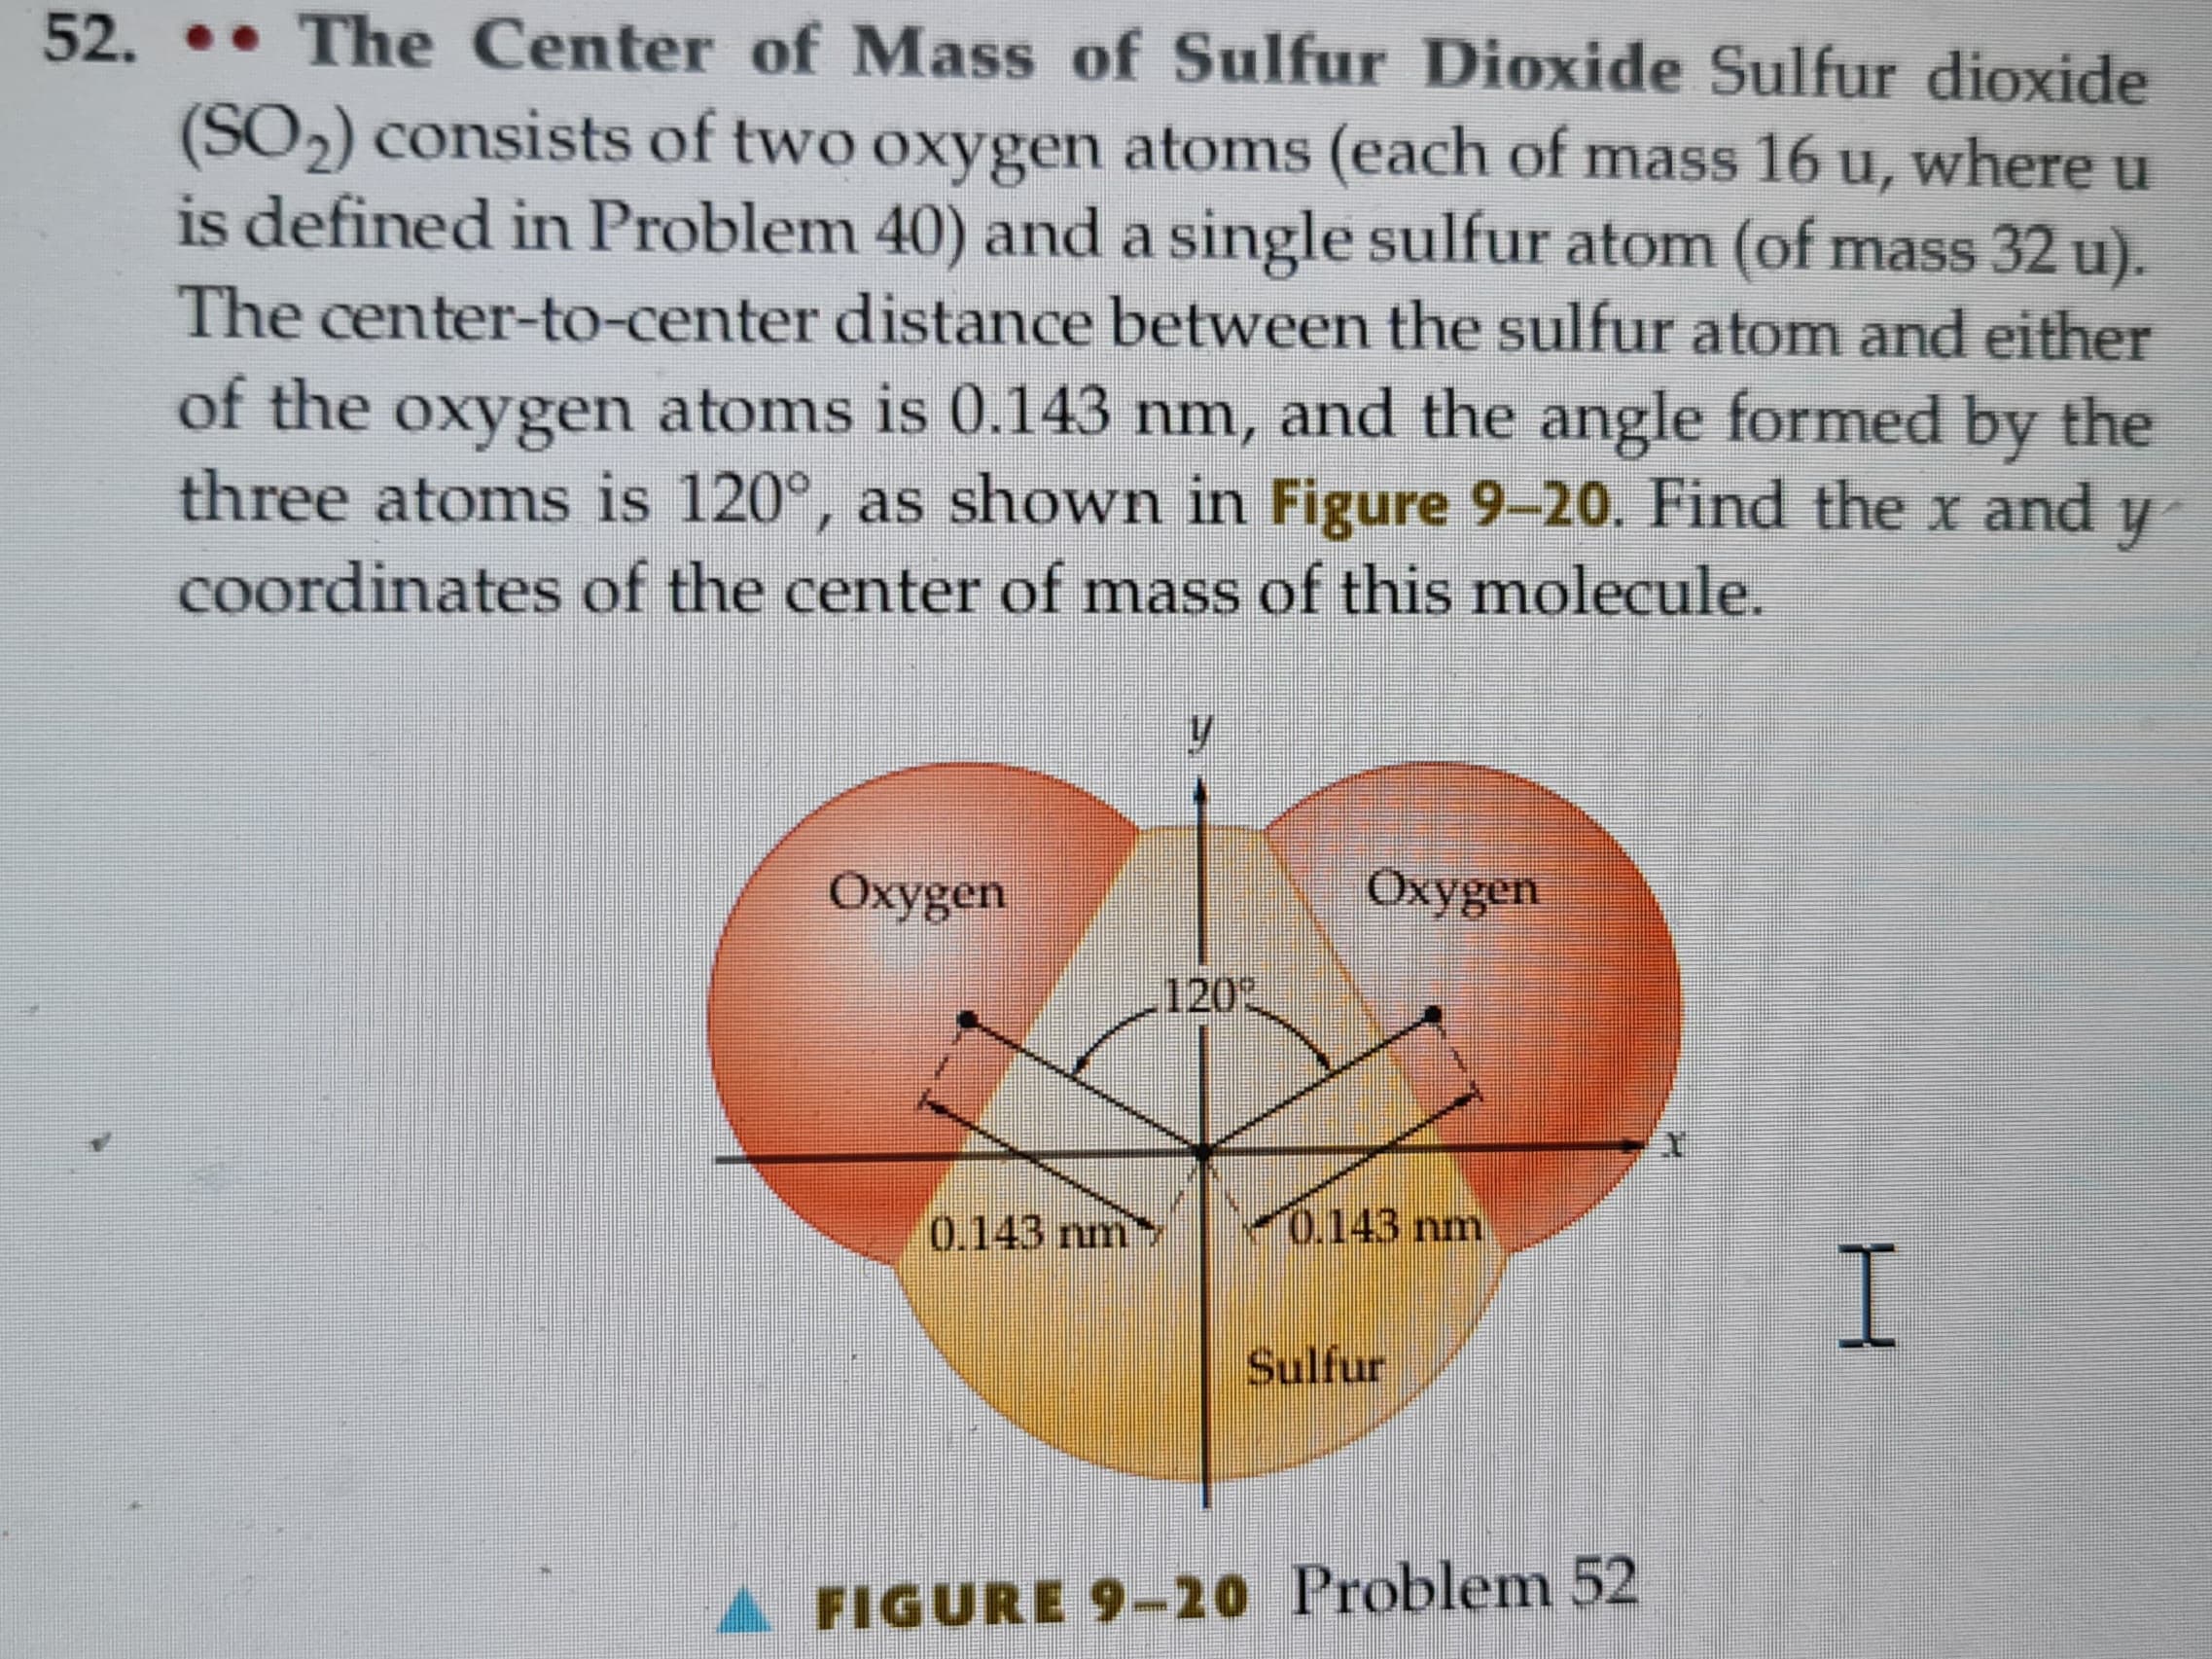 52. The Center of Mass of Sulfur Dioxide Sulfur dioxide
(SO₂) consists of two oxygen atoms (each of mass 16 u, where u
is defined in Problem 40) and a single sulfur atom (of mass 32 u).
The center-to-center distance between the sulfur atom and either
of the oxygen atoms is 0.143 nm, and the angle formed by the
three atoms is 120°, as shown in Figure 9-20. Find the x and
y
coordinates of the center of mass of this molecule.
Oxygen
0.143 nm
y
120°
Oxygen
0.143 nm
Sulfur
A FIGURE 9-20 Problem 52
I